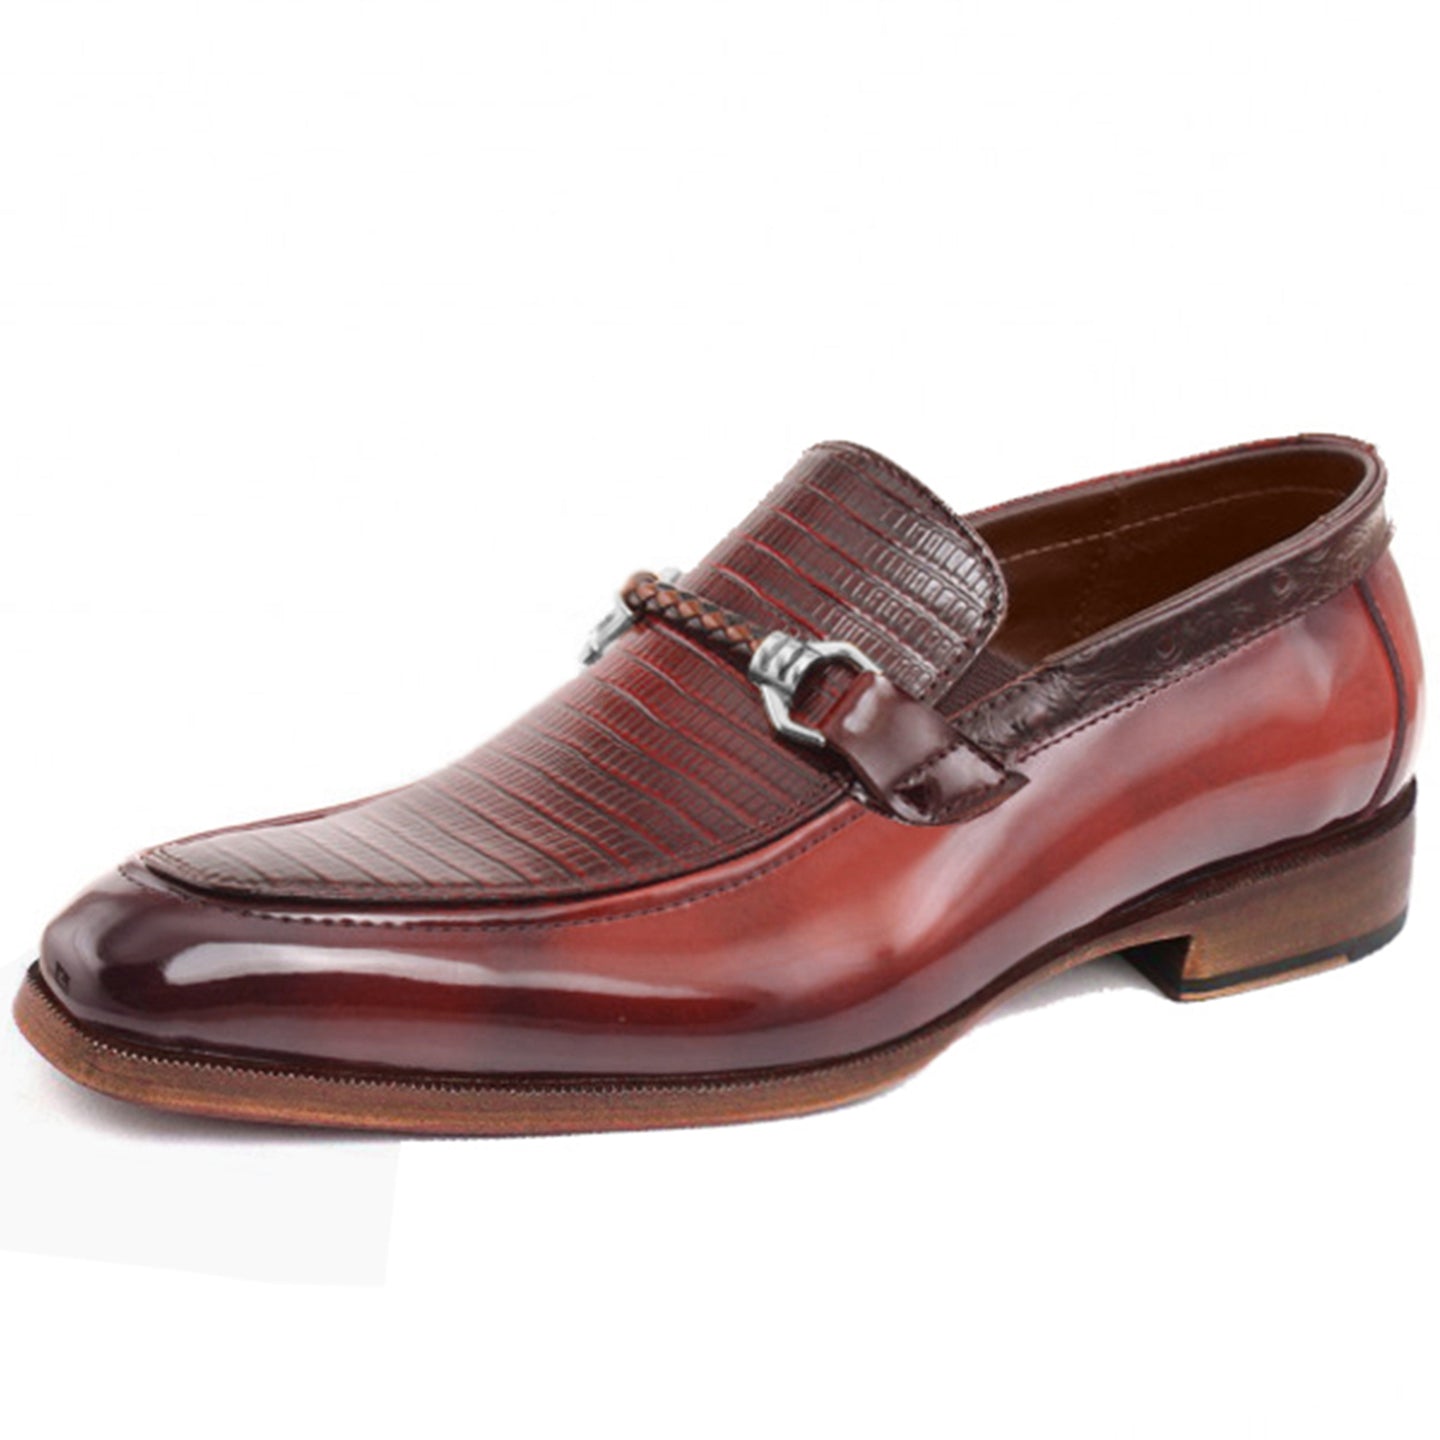 Johny Weber Handmade Red Leather Oxford Shoes